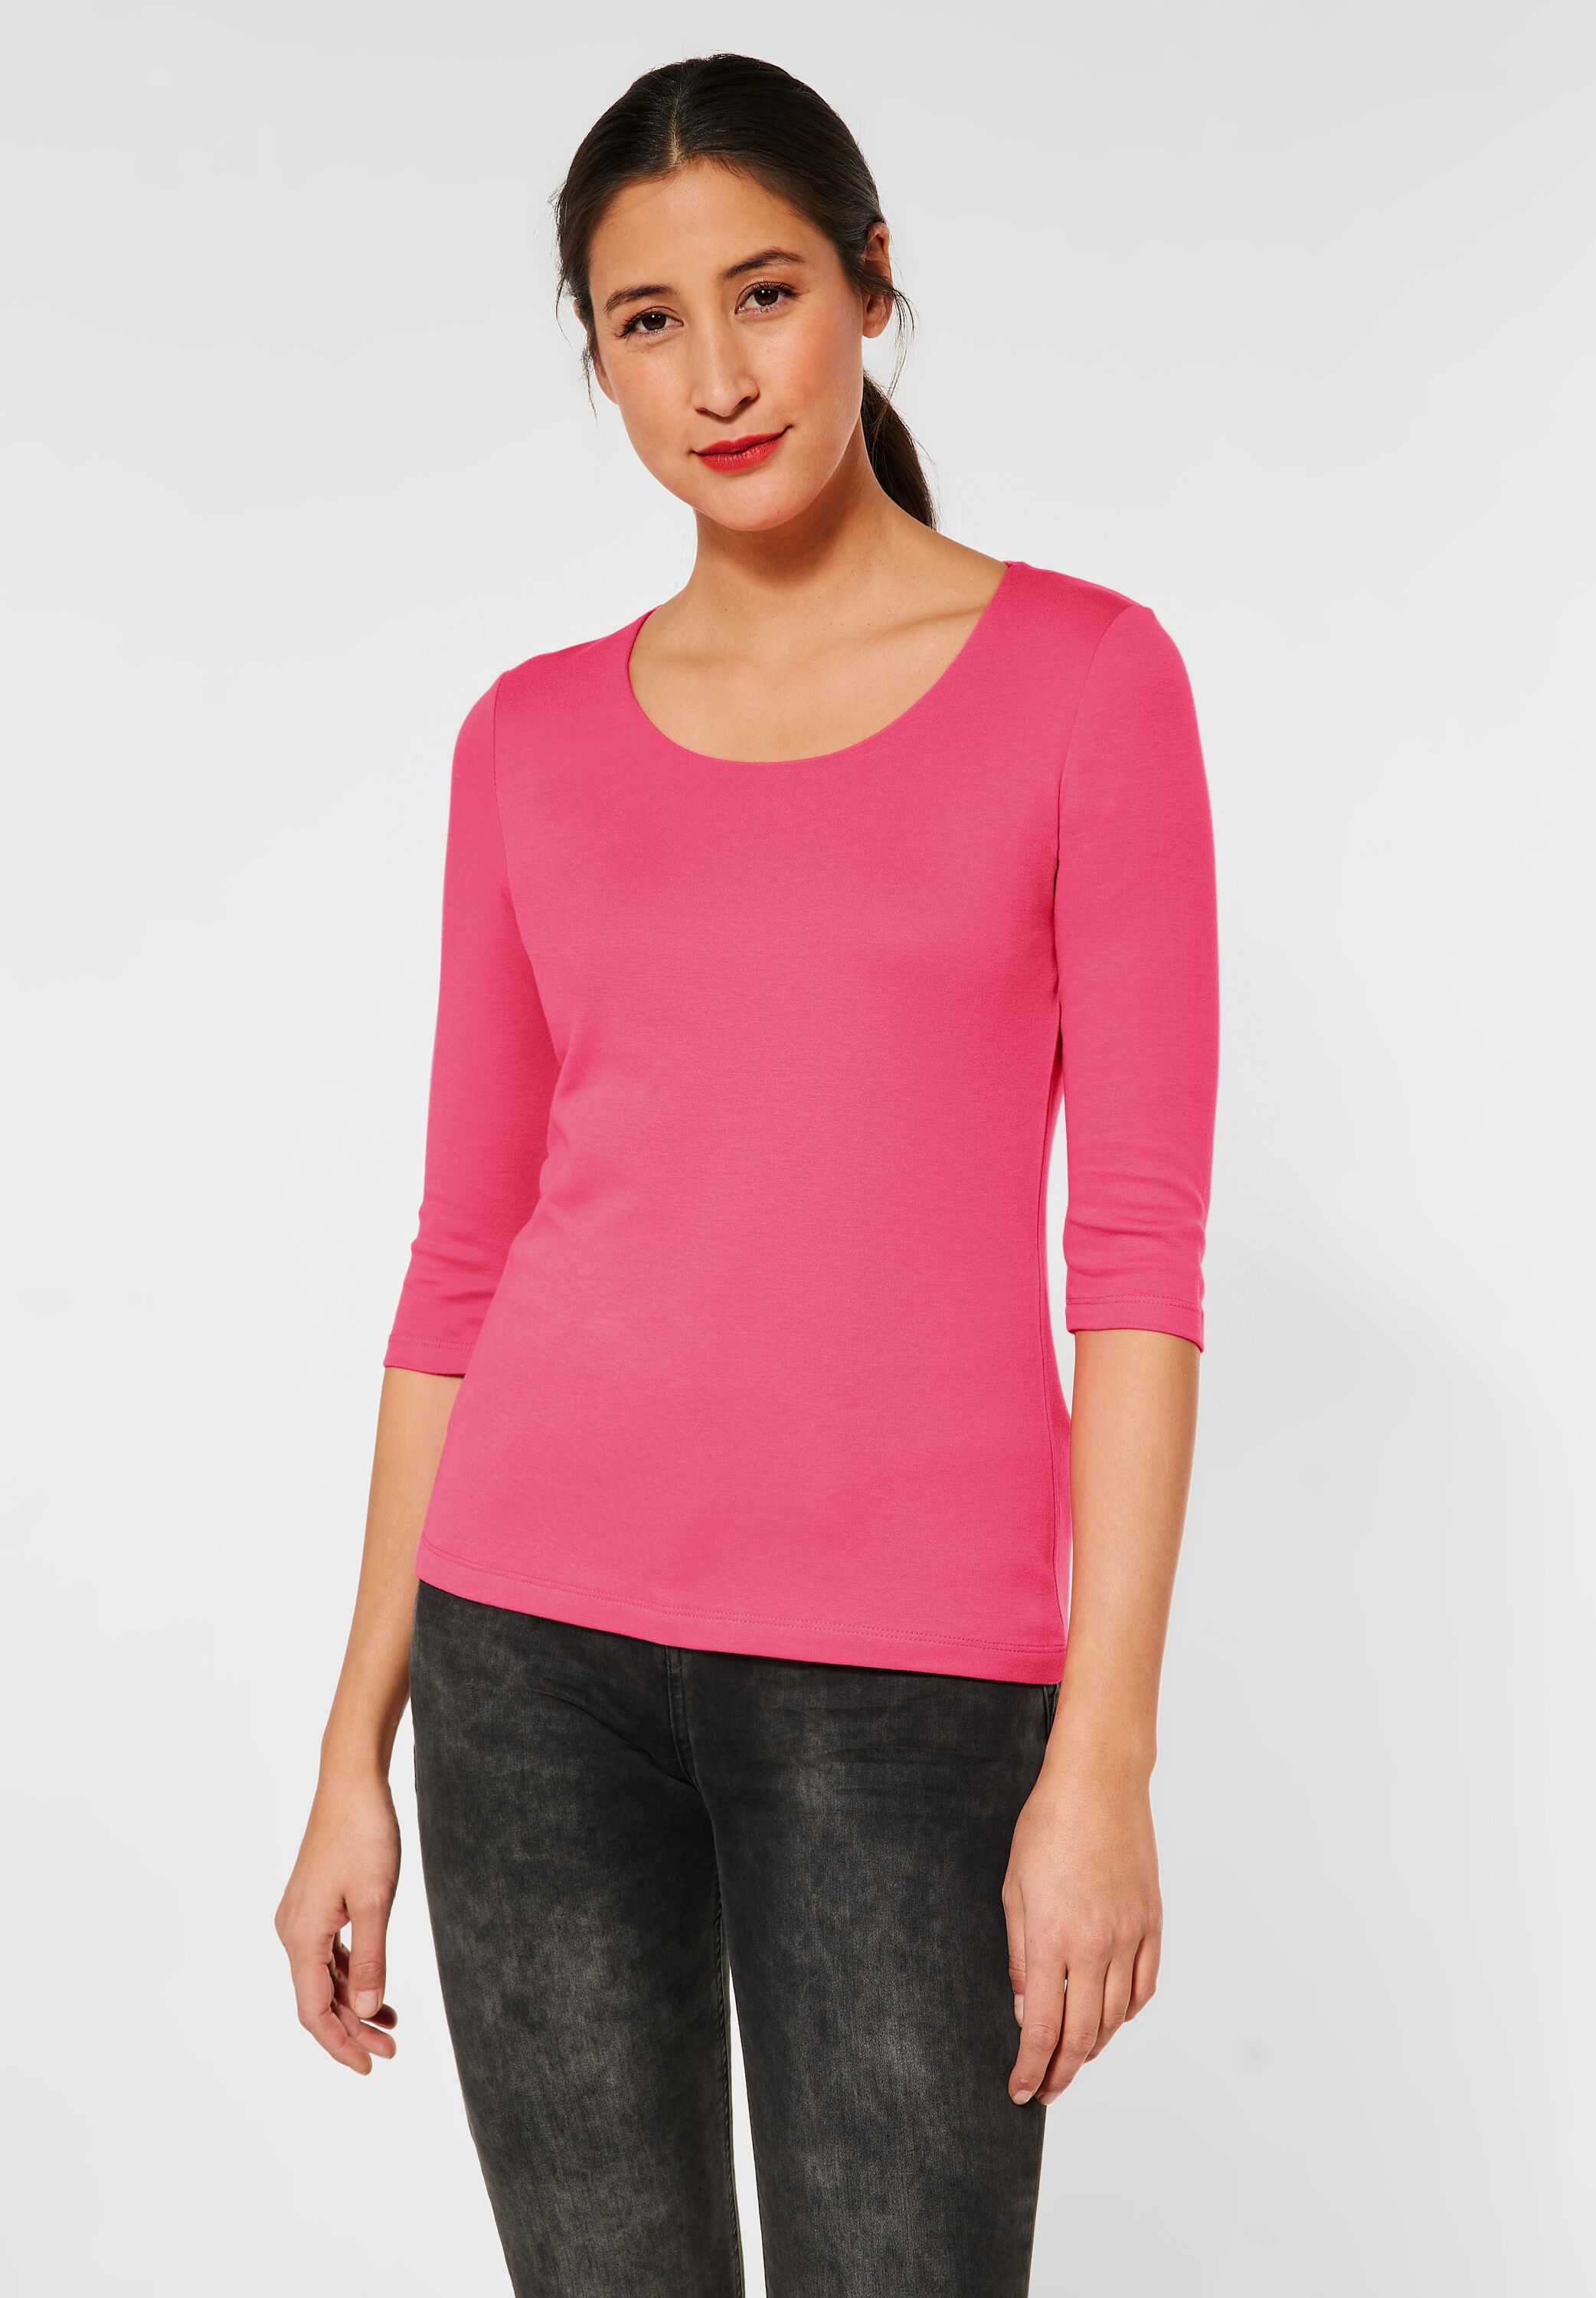 Street im Shirt Berry Rose - CONCEPT One Pania reduziert Mode in A317588-14647 SALE